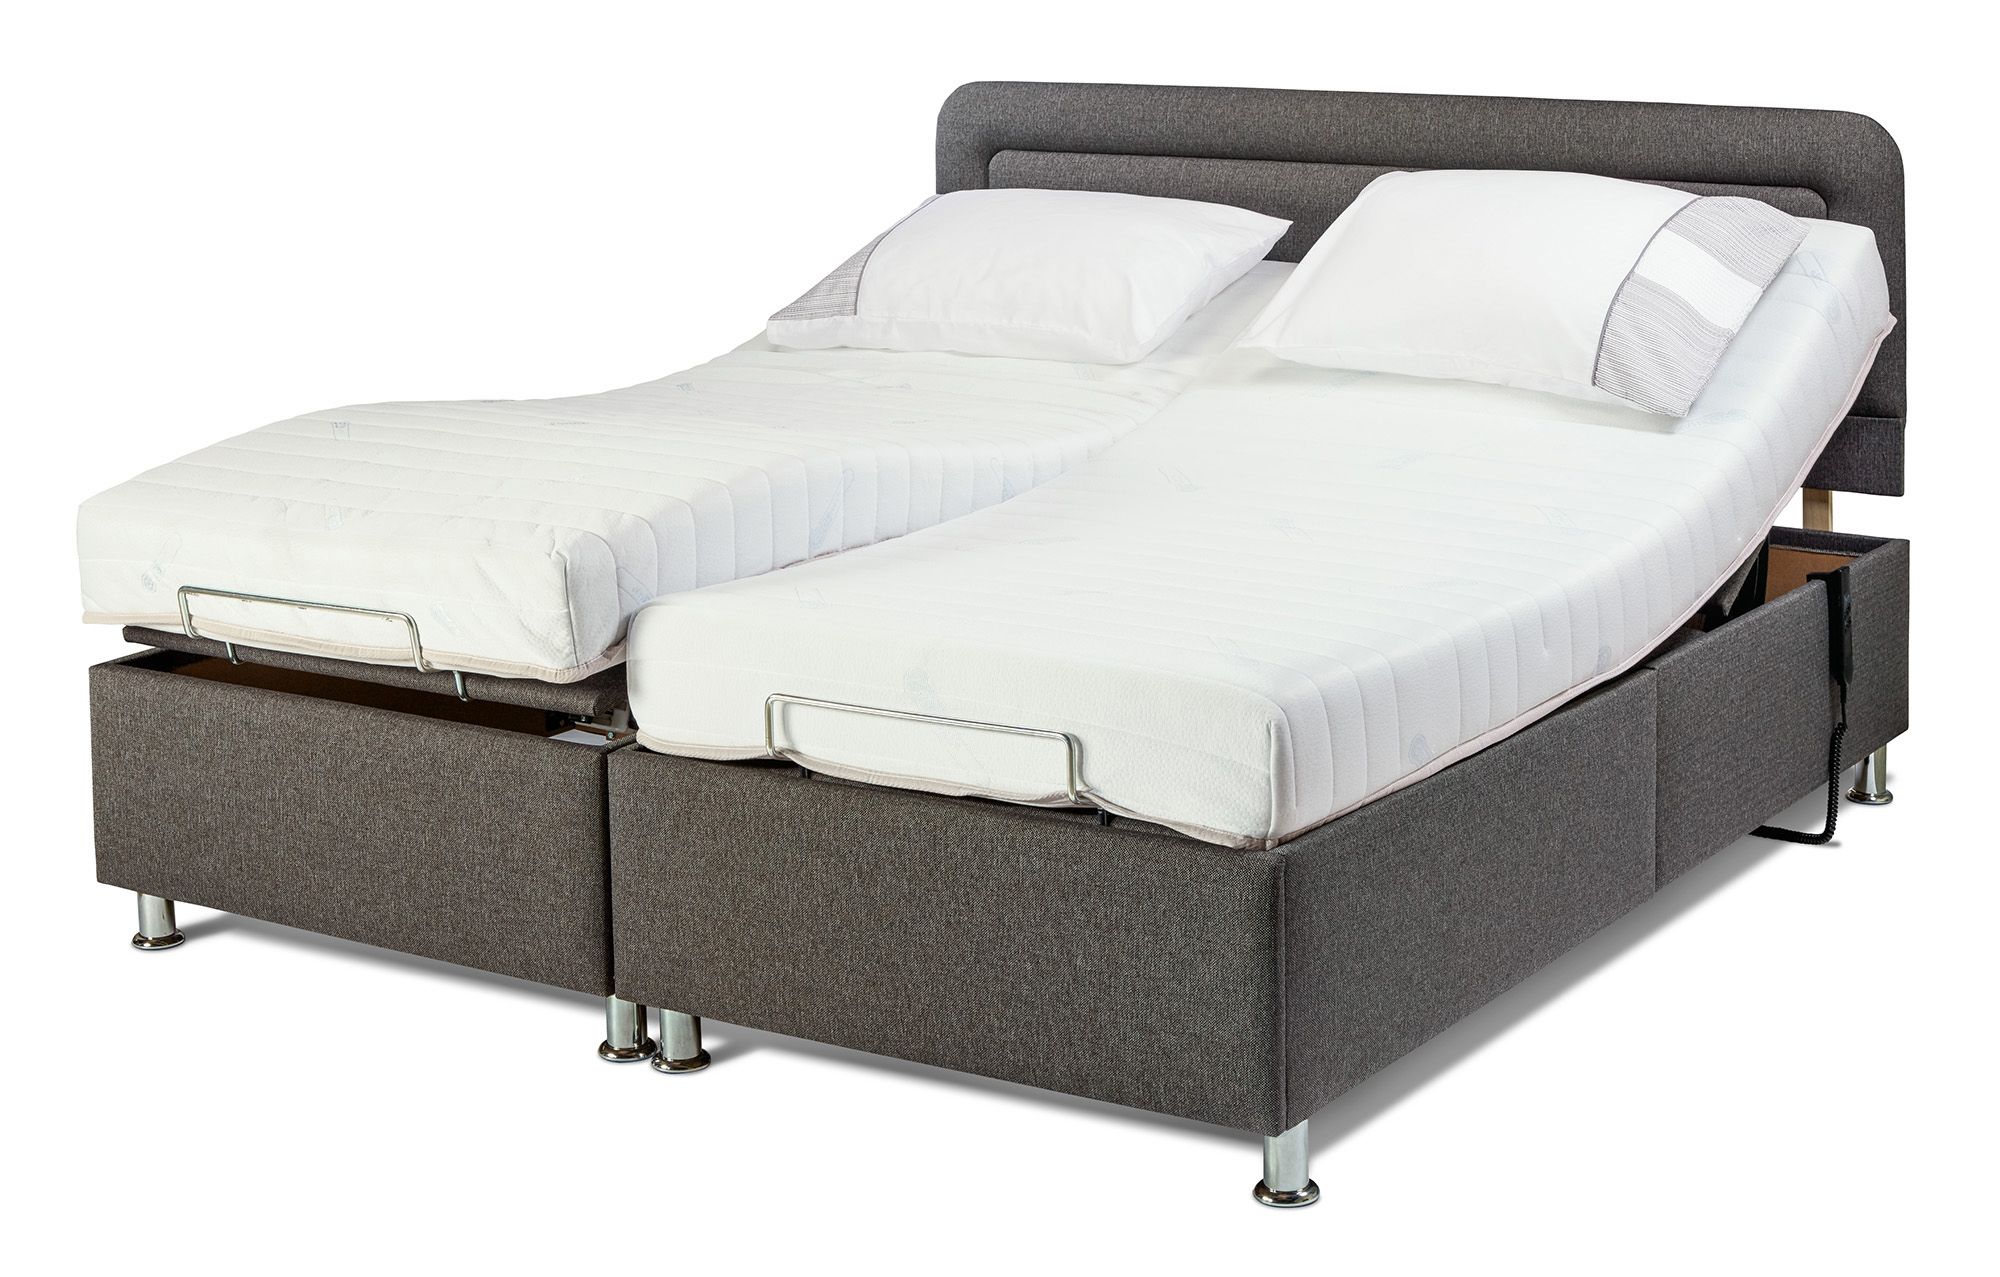 king size adjustable bed and mattress